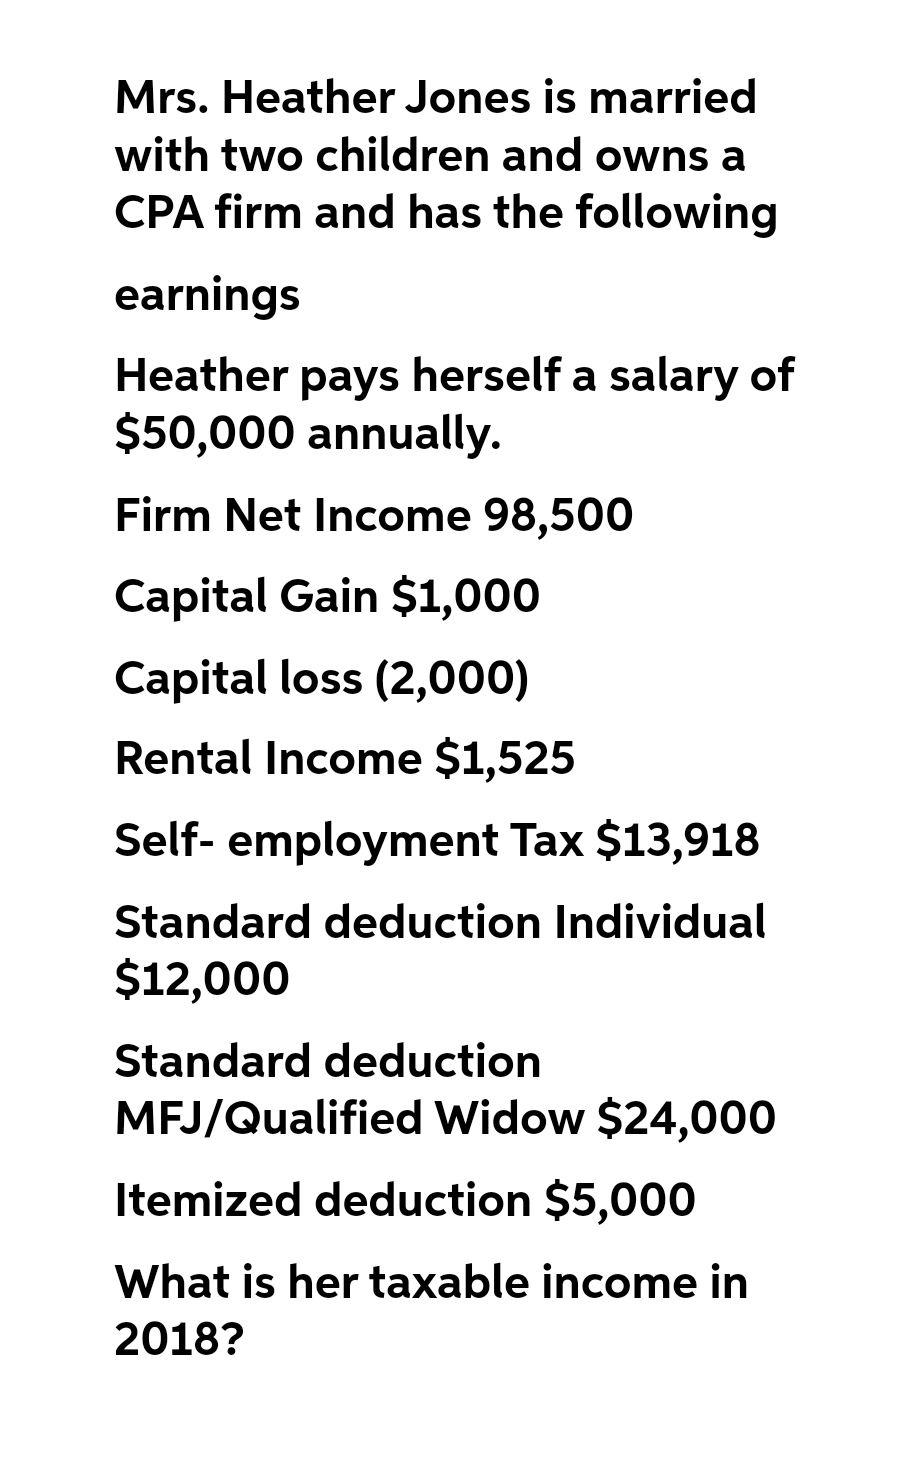 Mrs. Heather Jones is married
with two children and owns a
CPA firm and has the following
earnings
Heather pays herself a salary of
$50,000 annually.
Firm Net Income 98,500
Capital Gain $1,000
Capital loss (2,000)
Rental Income $1,525
Self-employment Tax $13,918
Standard deduction Individual
$12,000
Standard deduction
MFJ/Qualified Widow $24,000
Itemized deduction $5,000
What is her taxable income in
2018?